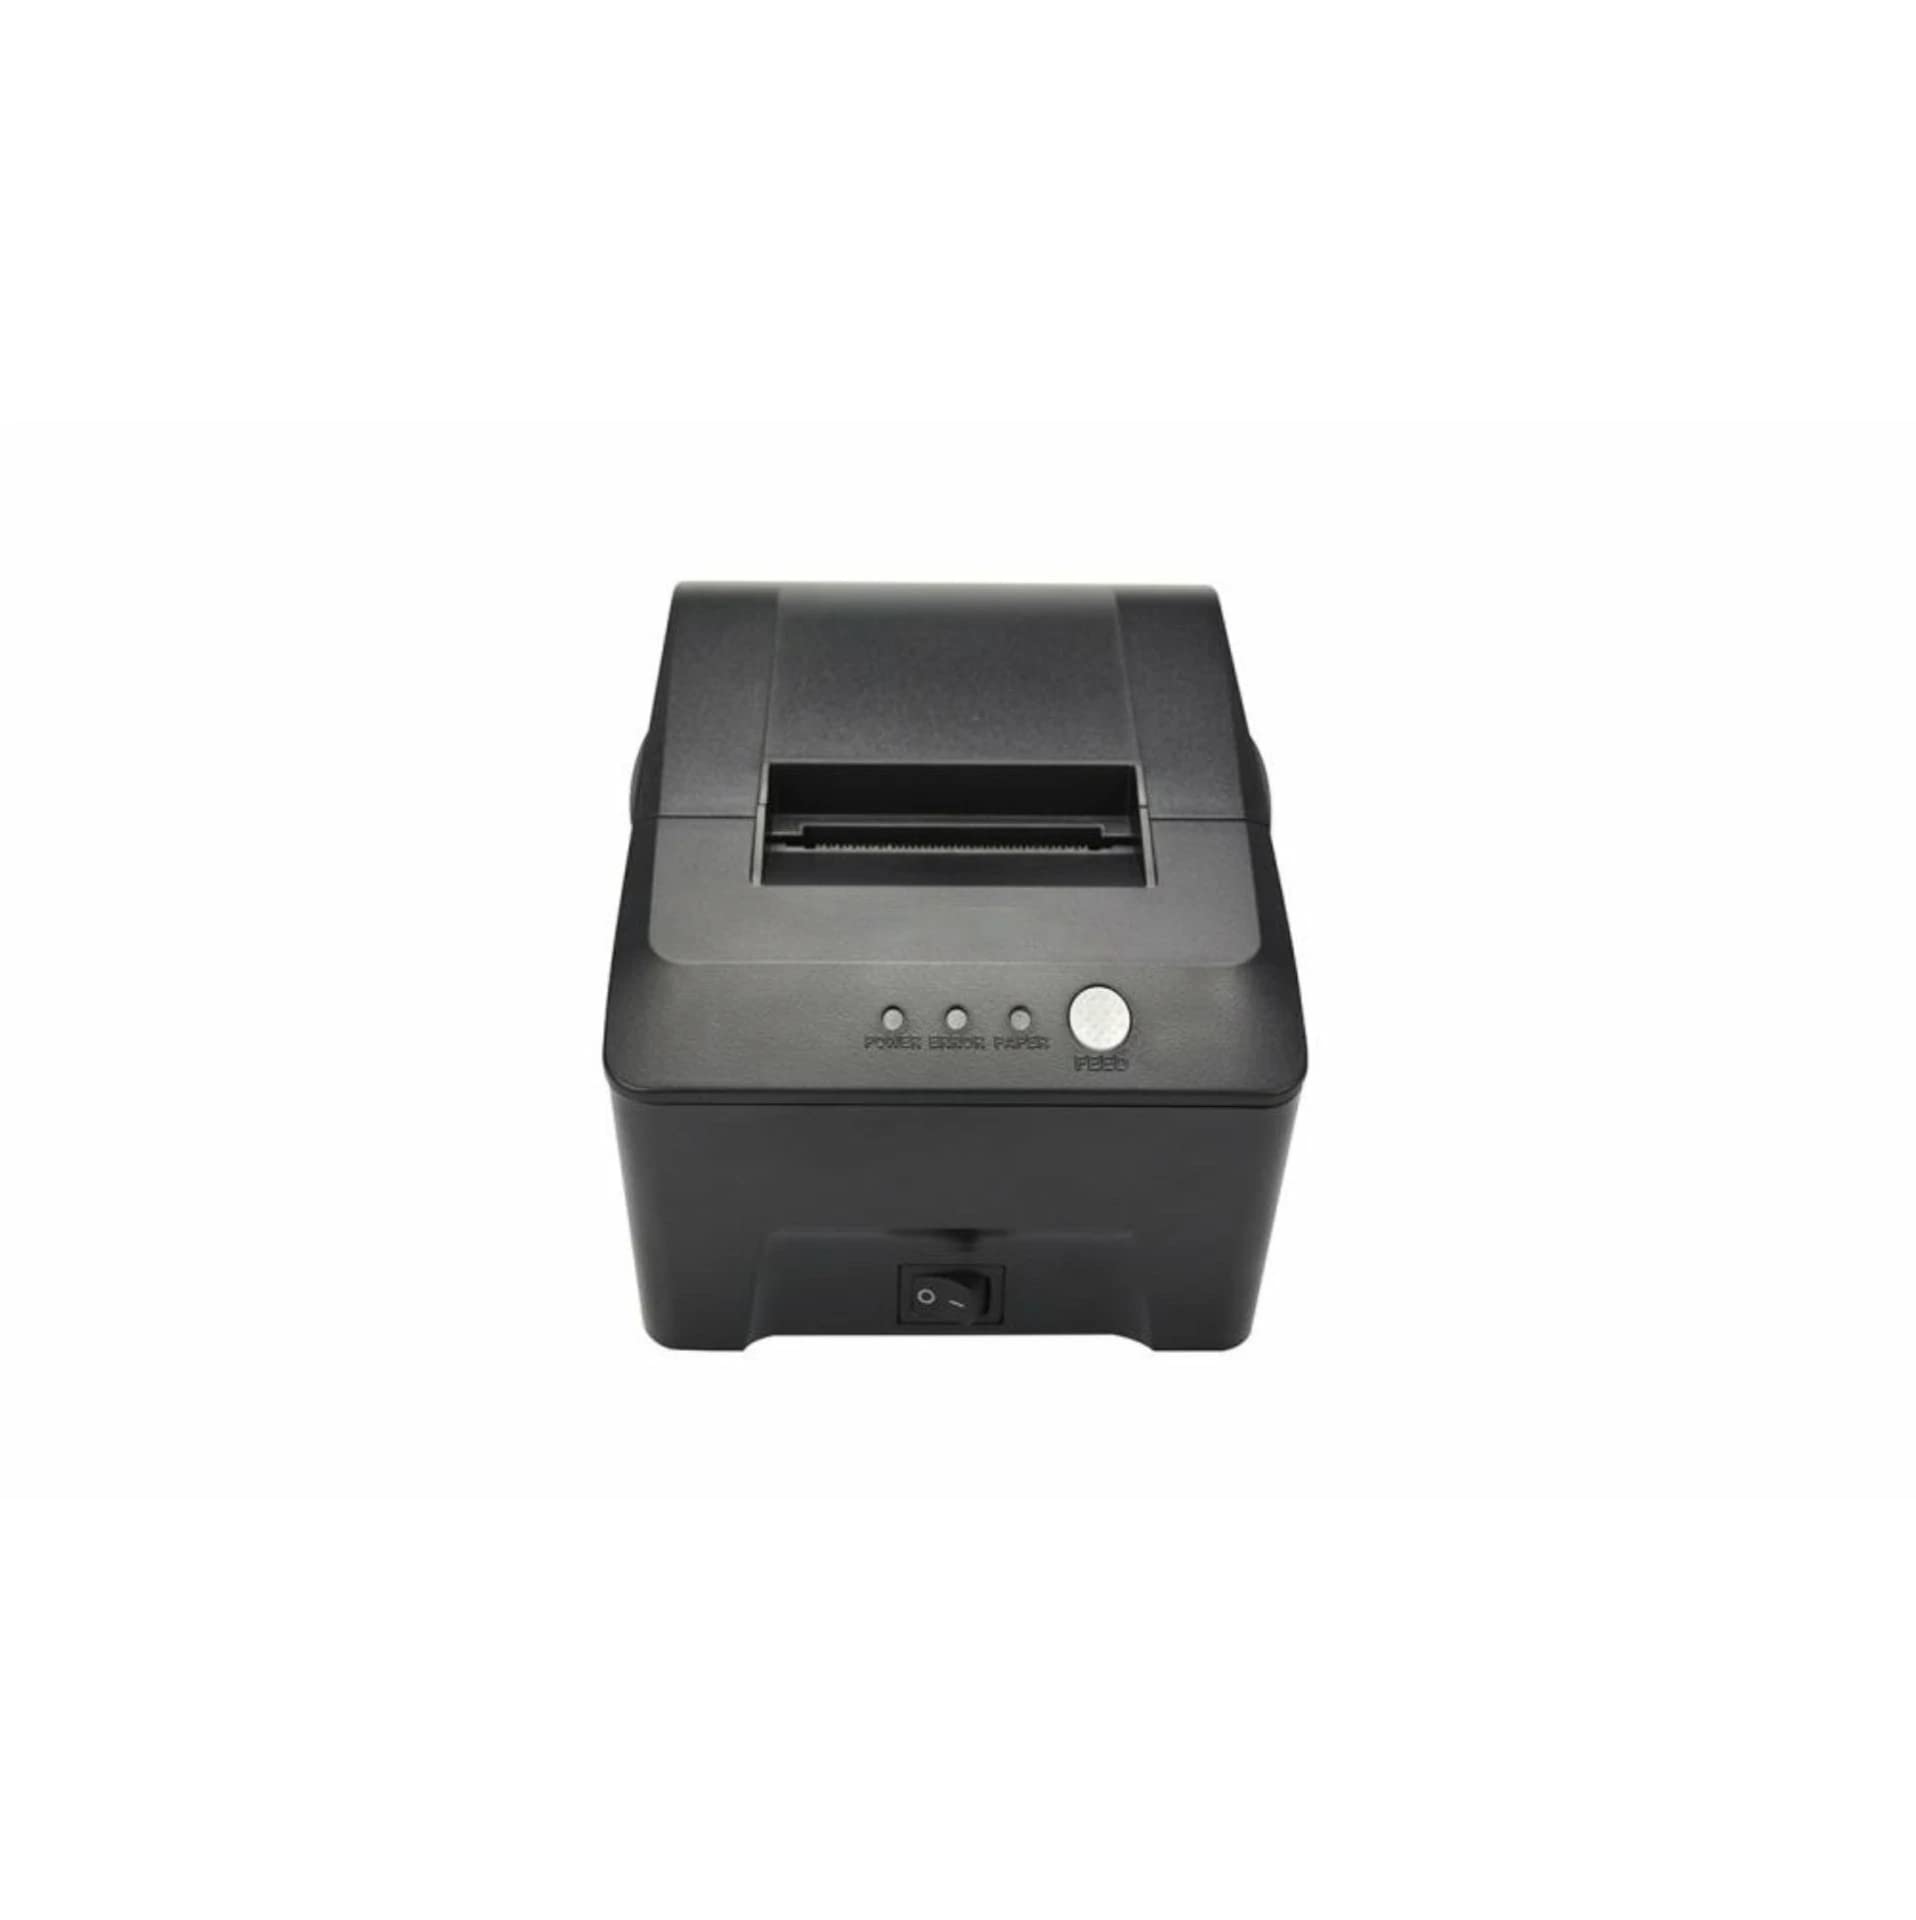 SellEton SL-412-E-L1 Sticker Printer Thermal Desktop for Shipping Labels, Barcodes, Receipts, Tags USB Interface   Serial Port, Inch, with Power S - 2